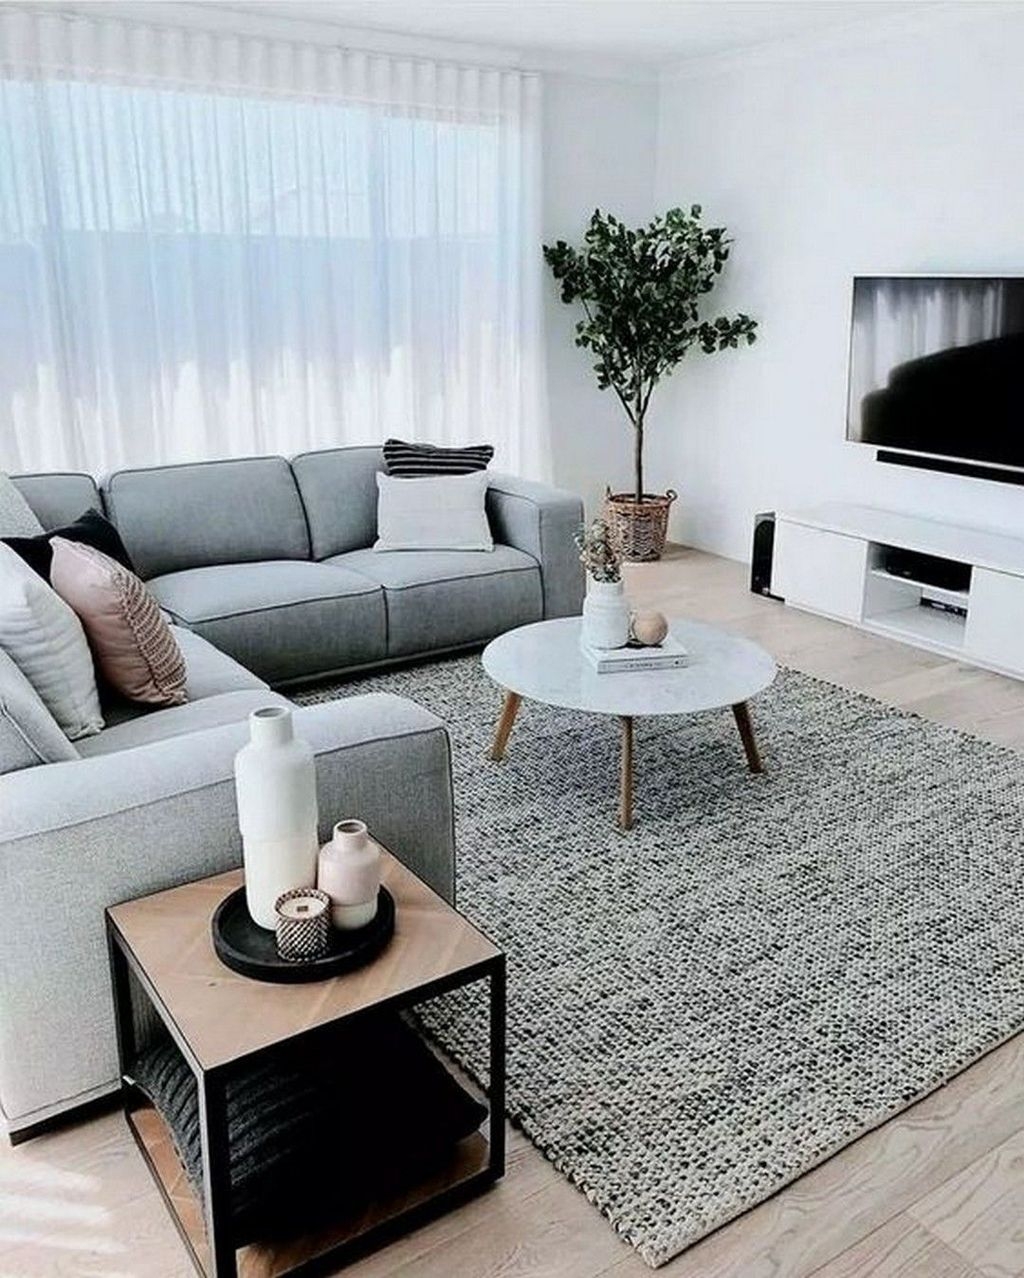 Modern And Minimalist Sofa For Your Living Room28